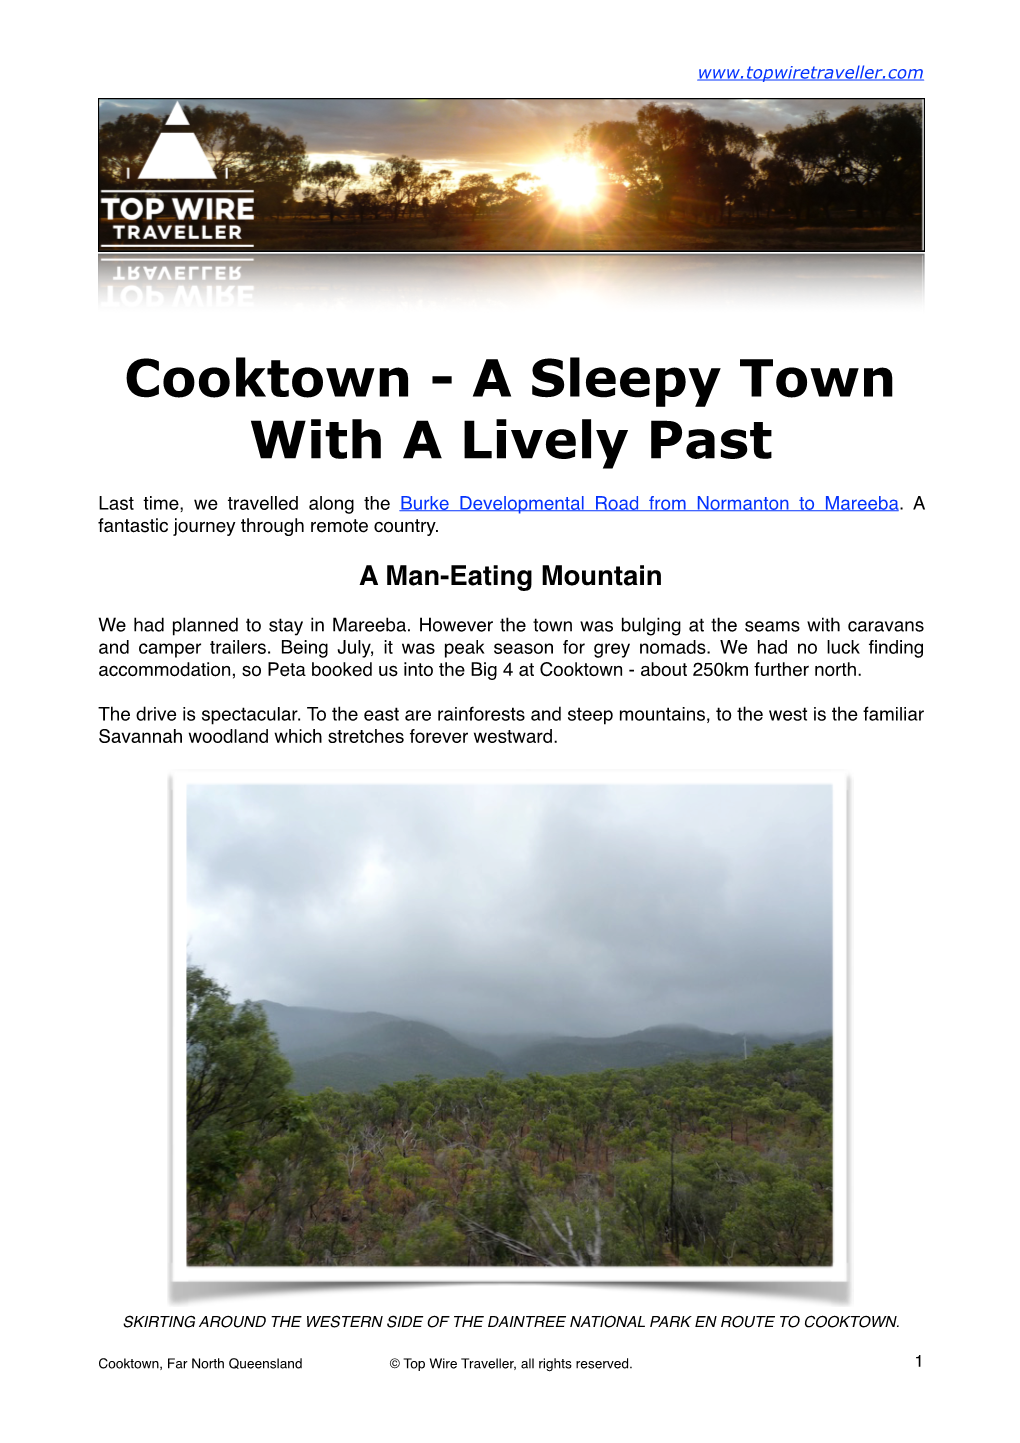 Cooktown - a Sleepy Town with a Lively Past